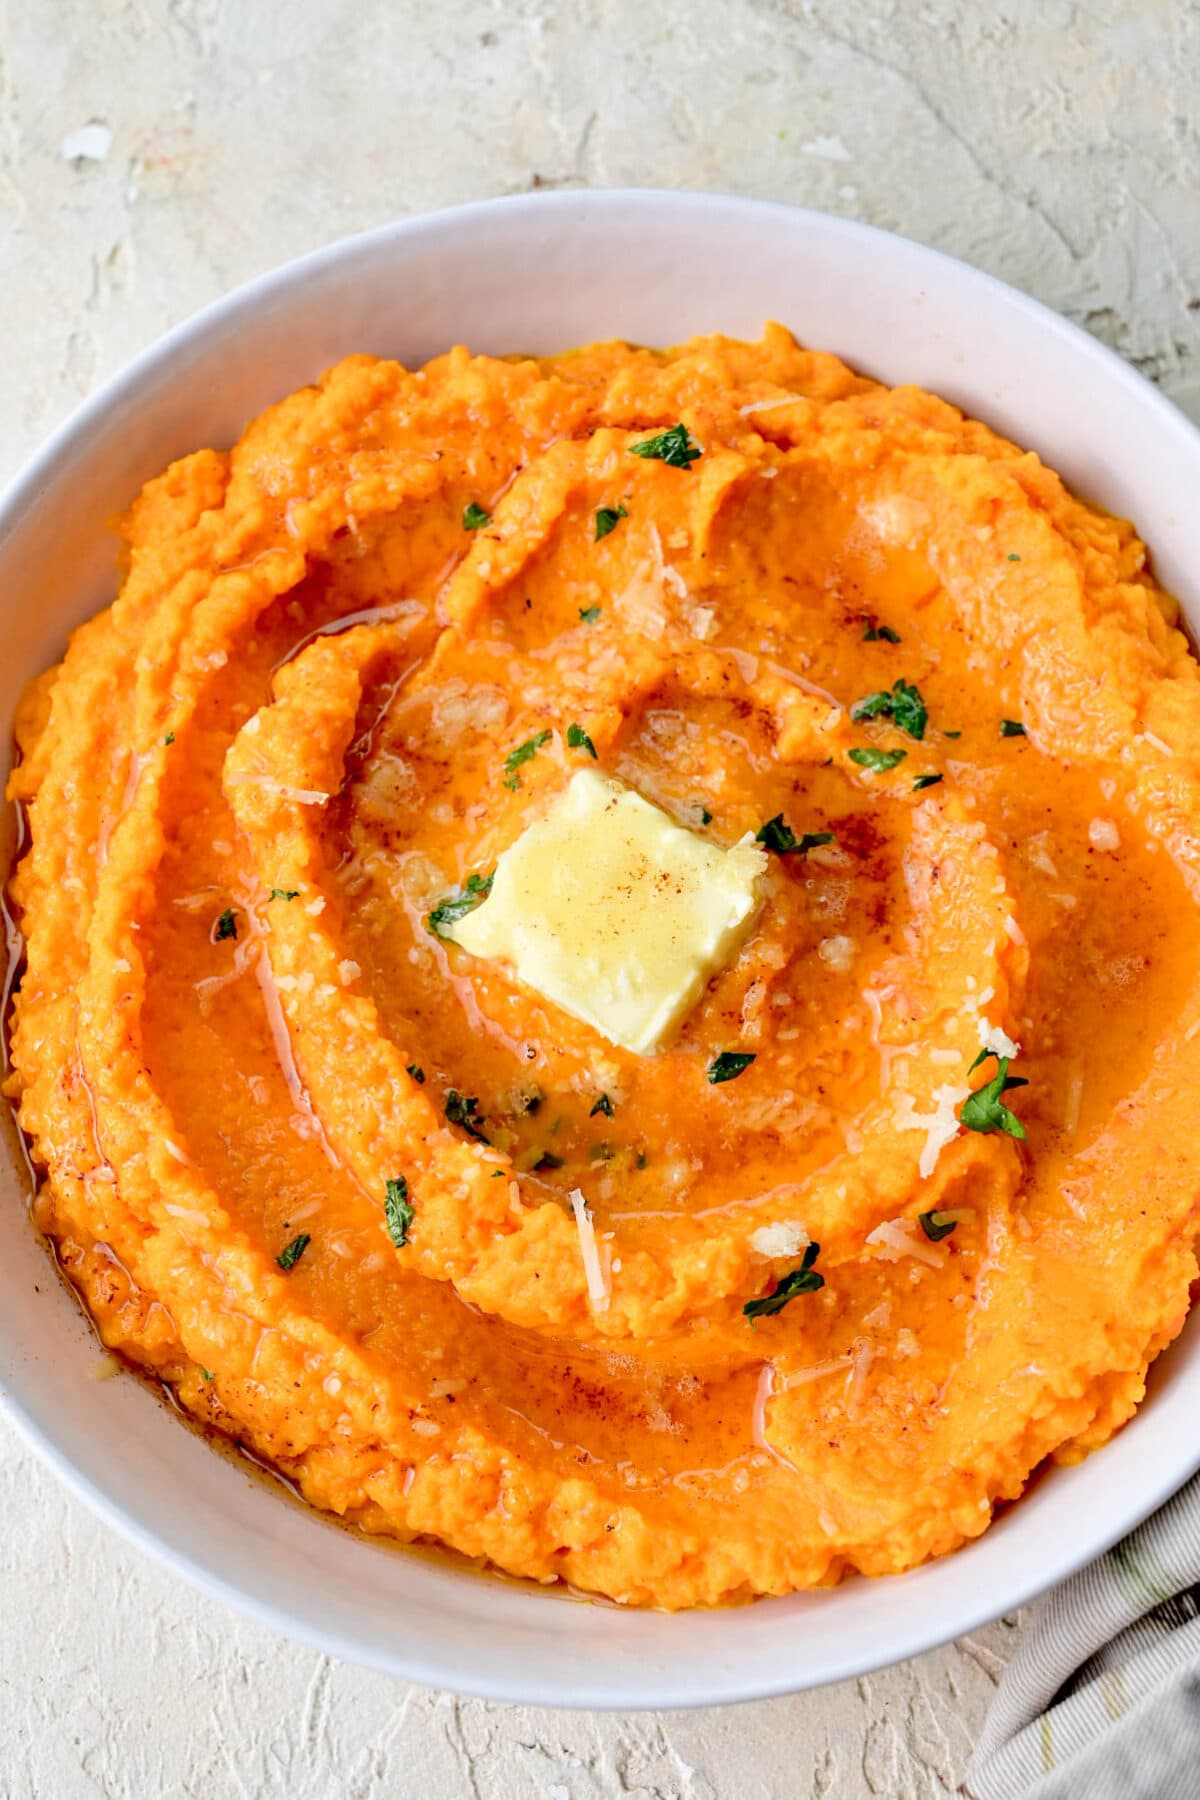 Mashed Carrots - Everyday Delicious